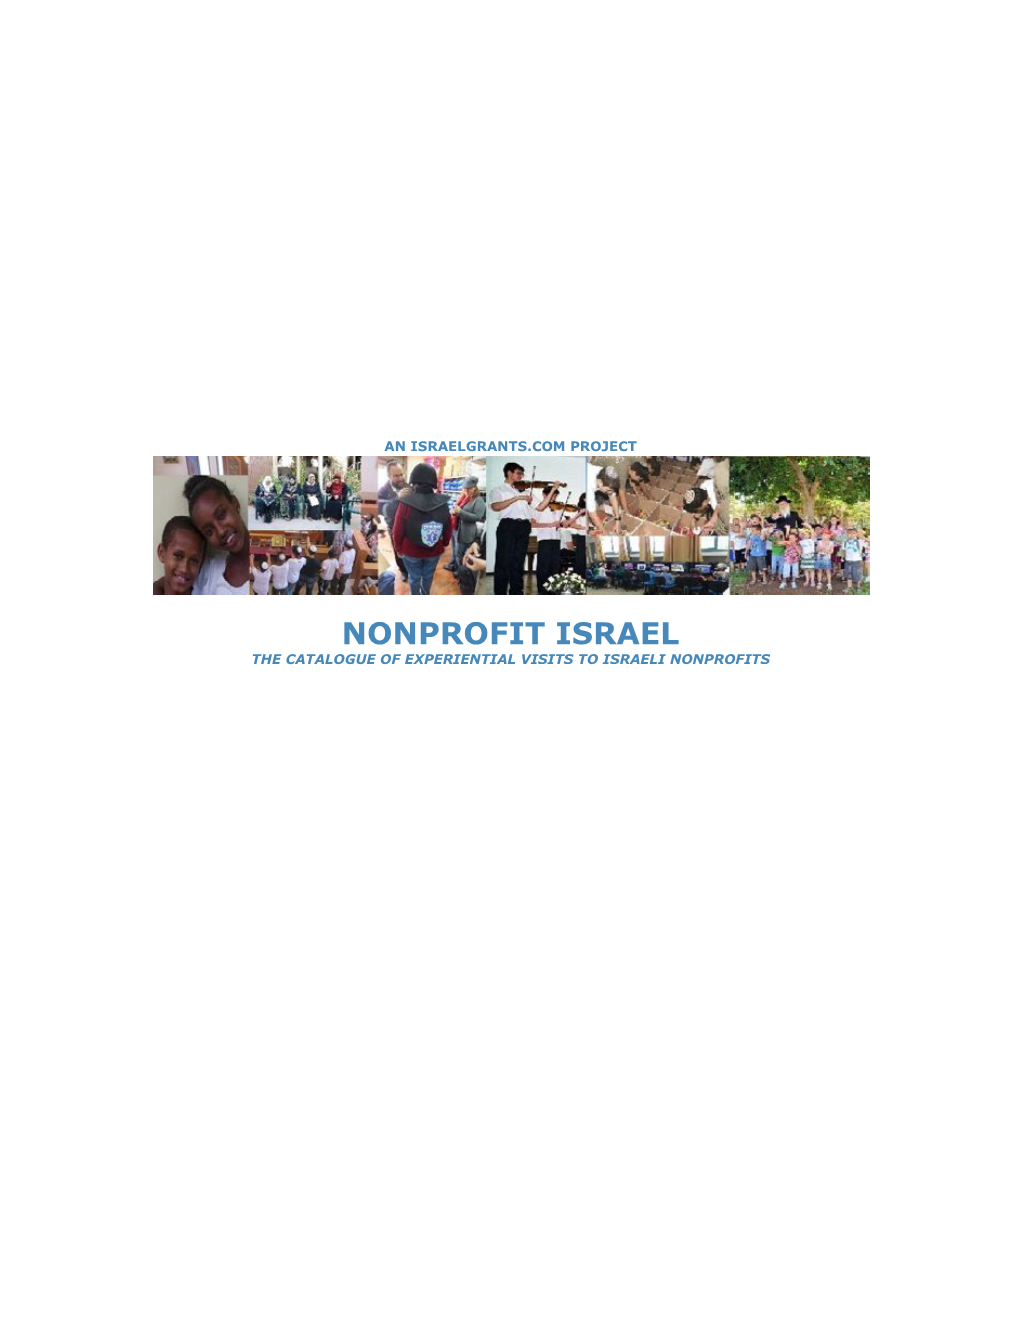 The Catalogue of Experiential Visits to Israeli Nonprofits